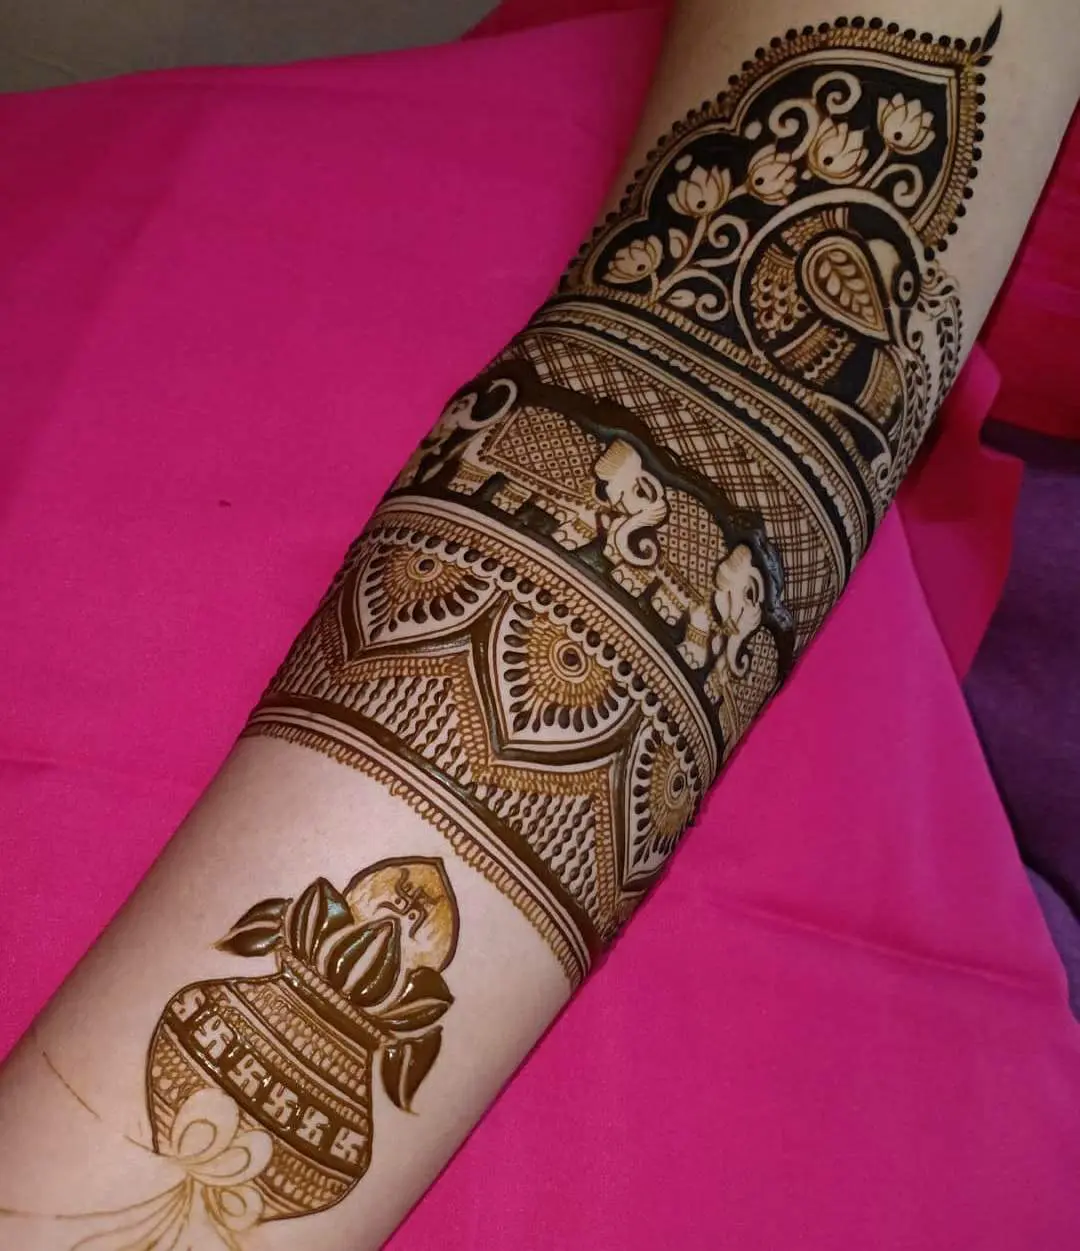 A mehndi that is dazzling with an adorable elephant